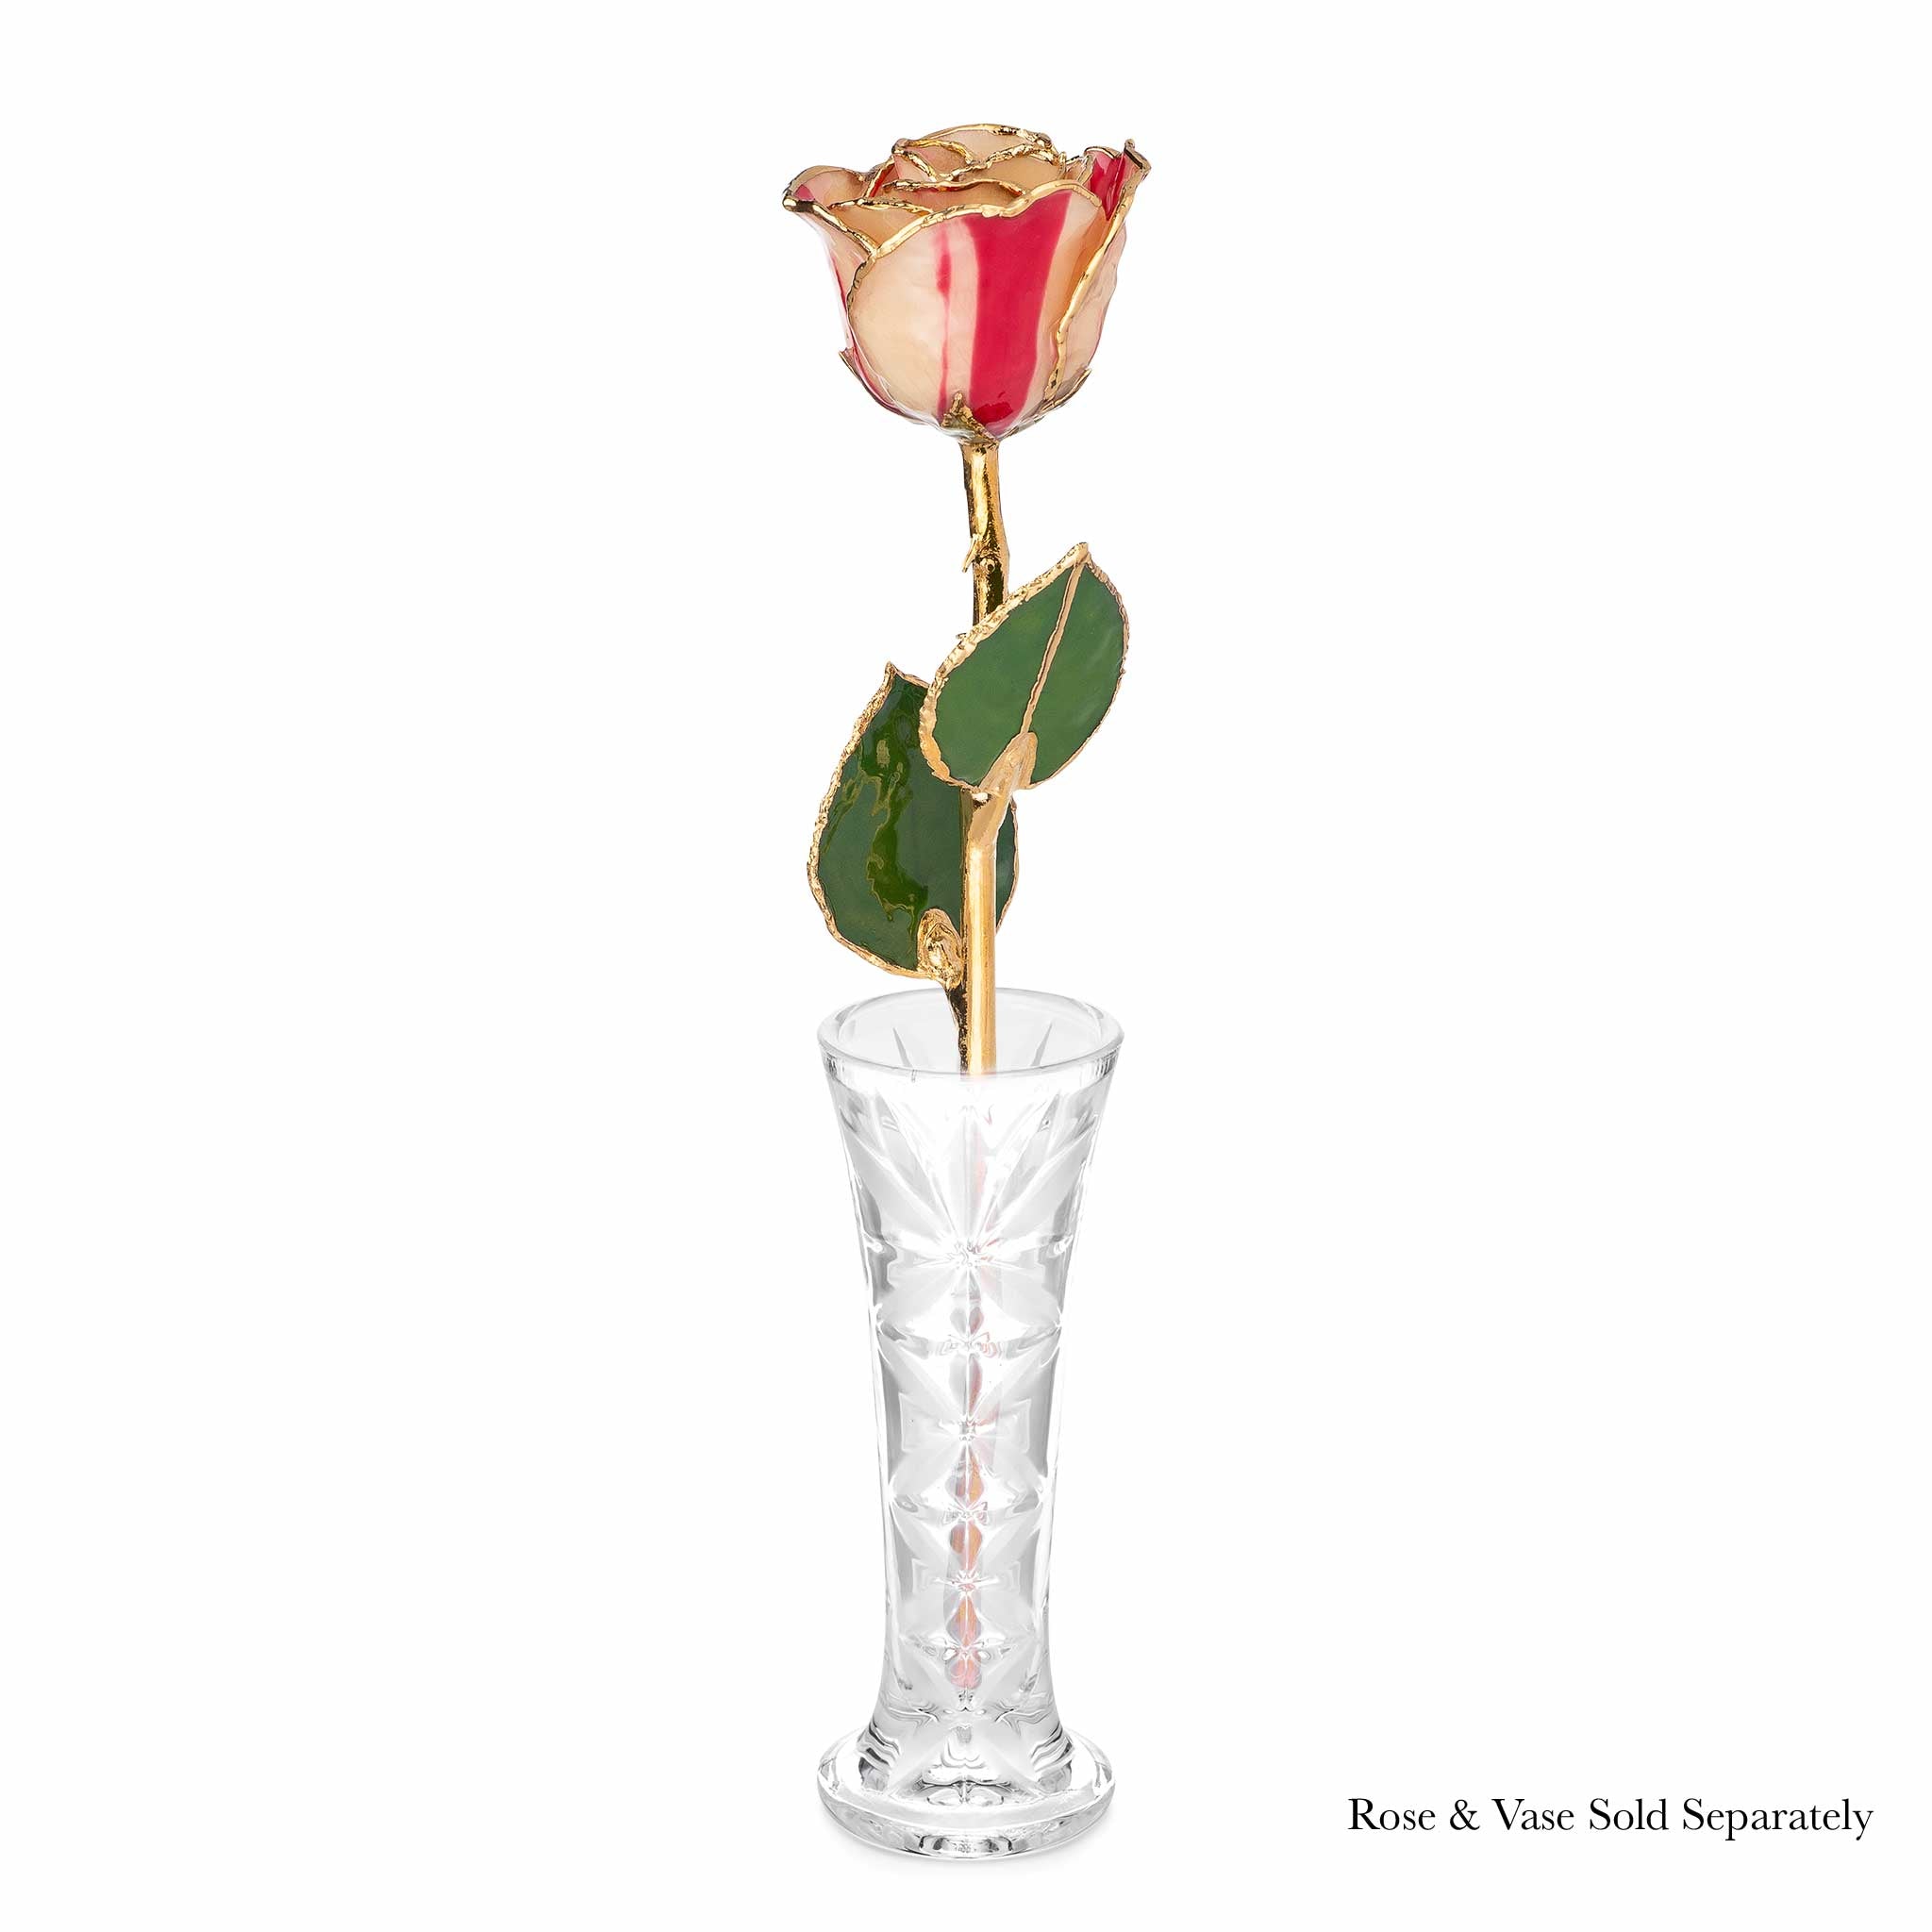 24K Gold Trimmed Forever Rose with Peppermint Striped Petals. View of Stem, Leaves, and Rose Petals and Showing Detail of Gold Trim. shown in optional vase.